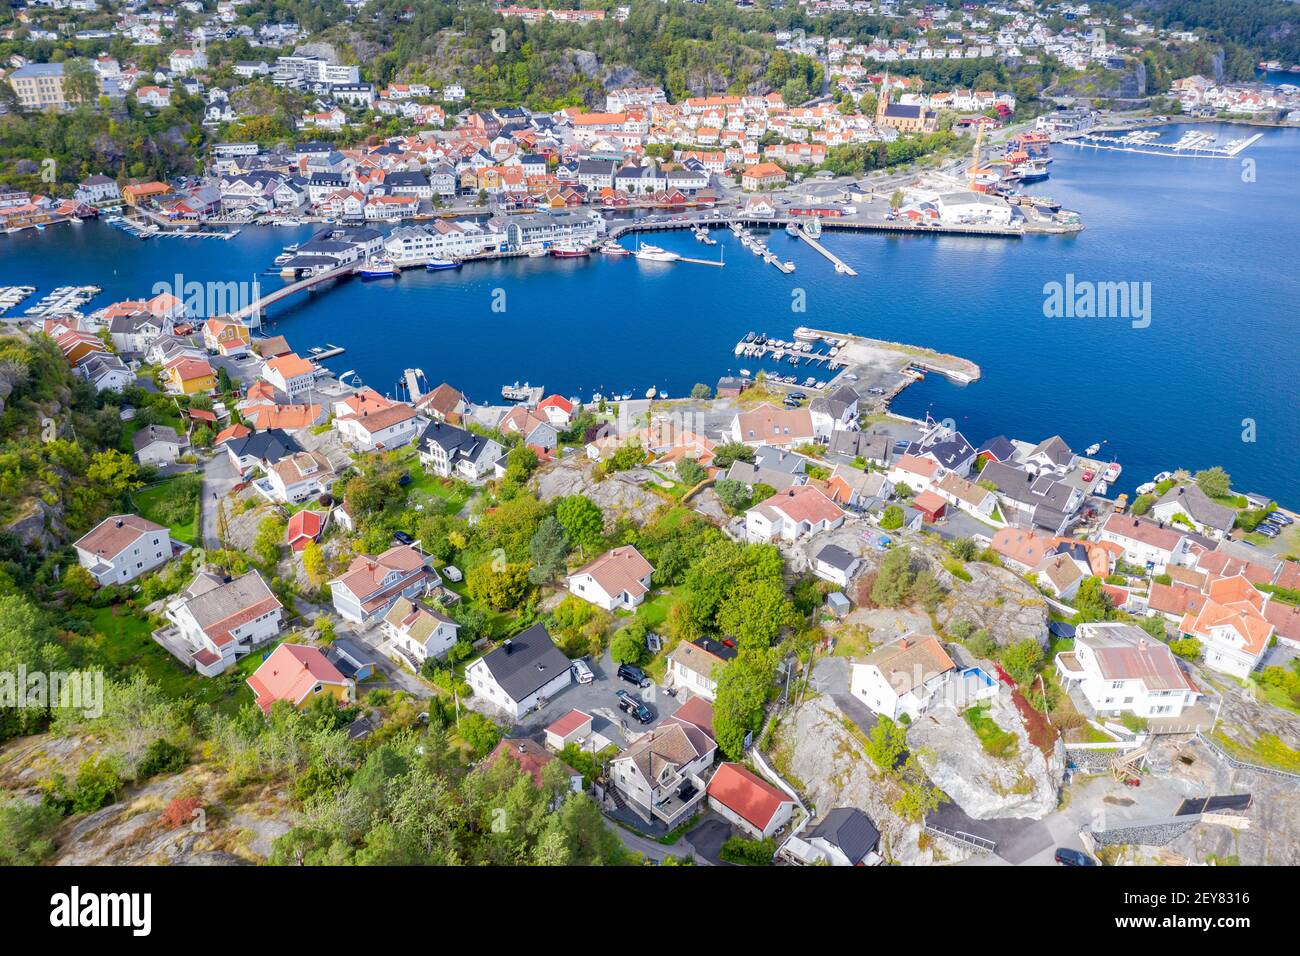 Aerial view over island Kragero, traditional village at the southern norwegian coast, typical white wooden houses at the waterfront, Norway Stock Photo